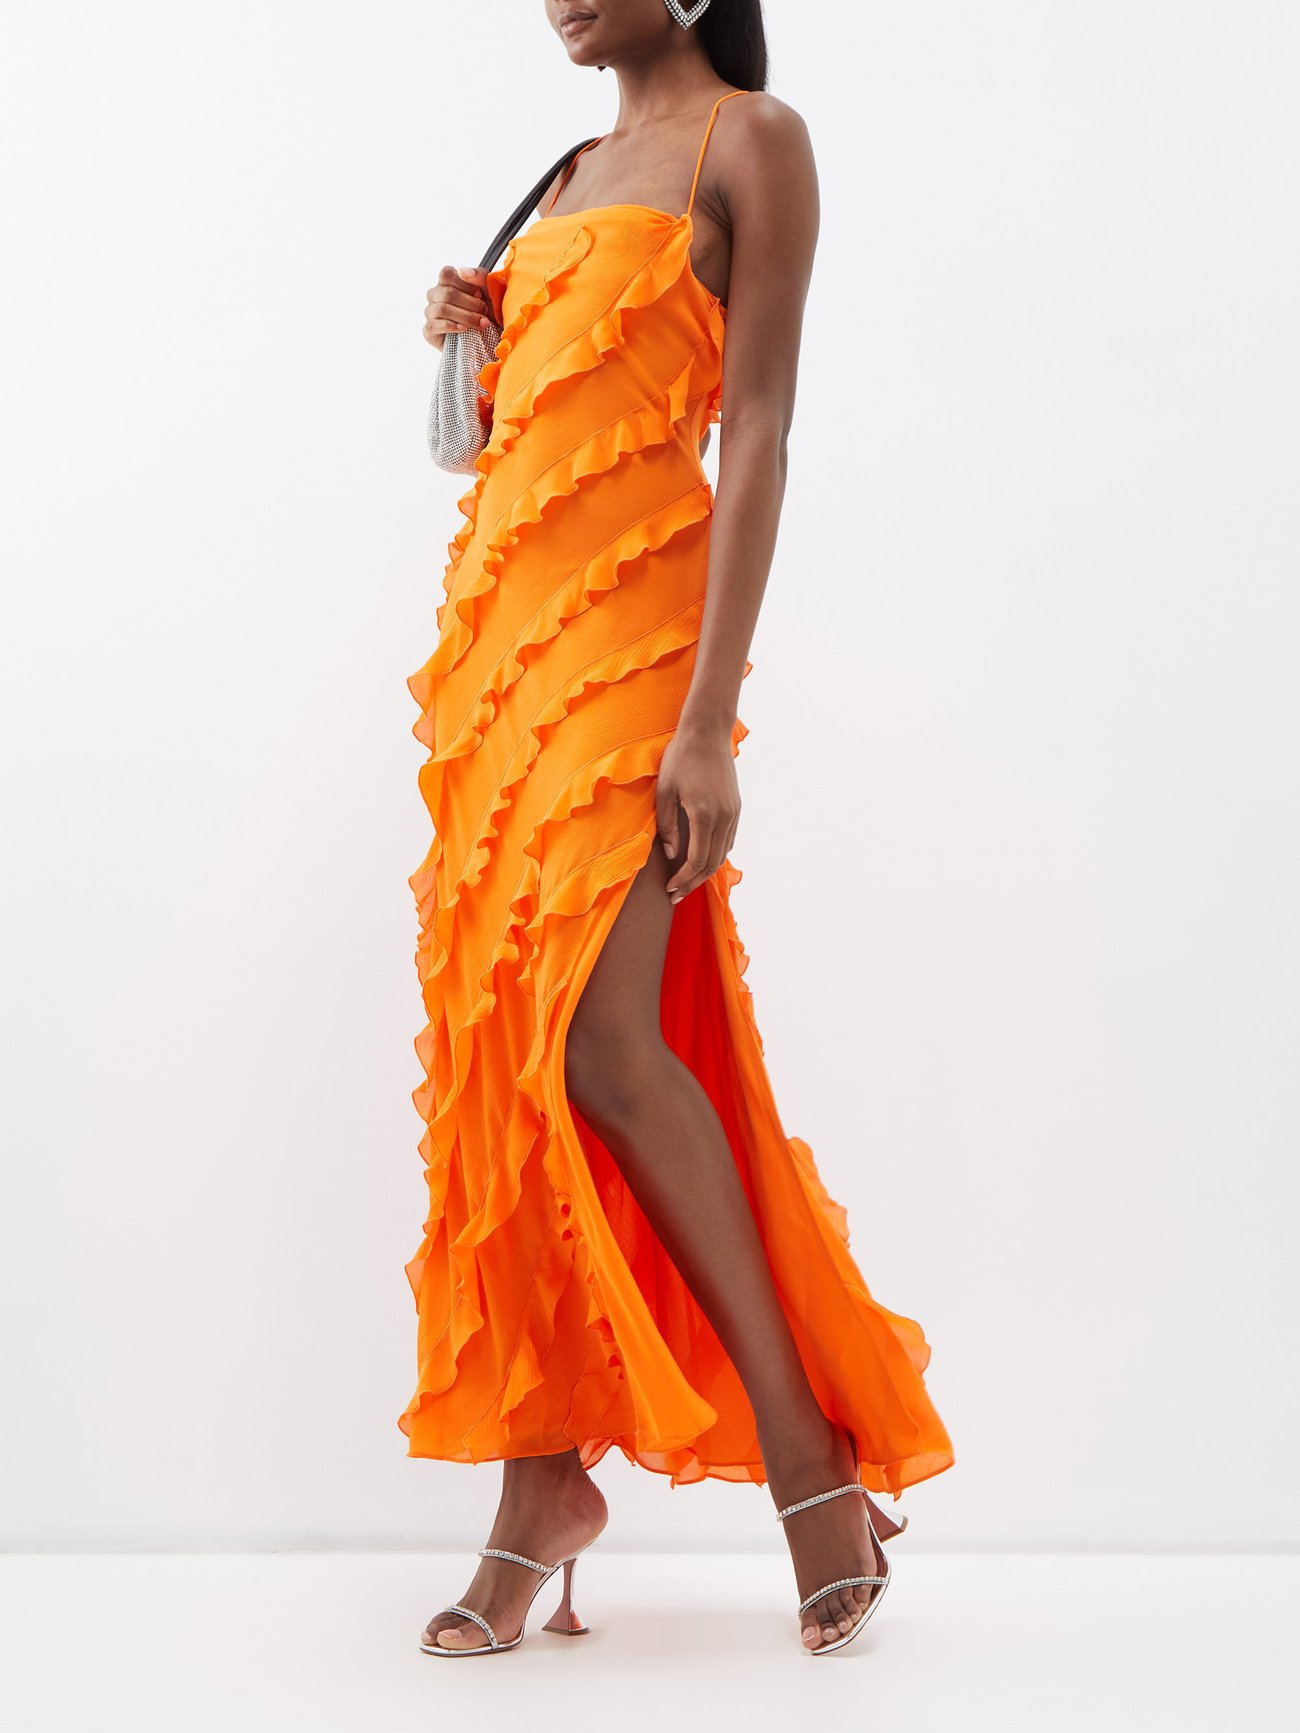 Spice up your summer party looks with Staud's orange Elvire dress. Shaped to a figure-skimming slip from lightweight crepe with diagonal ruffles, an open lace-up back and a thigh-high slit.